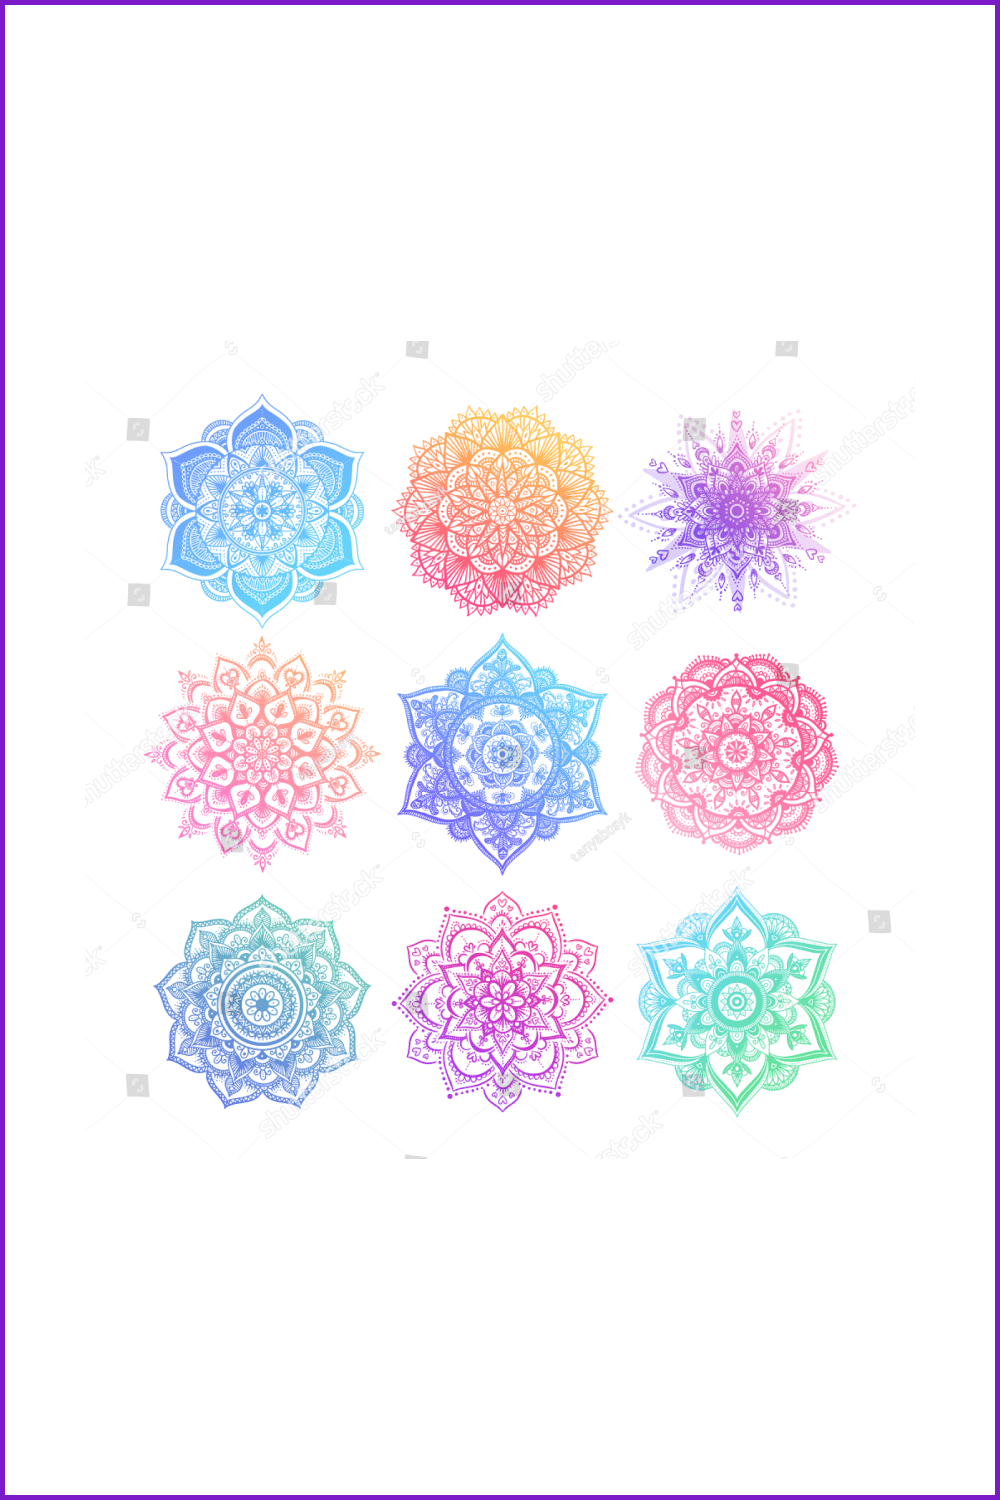 Colored mandala of different shapes.